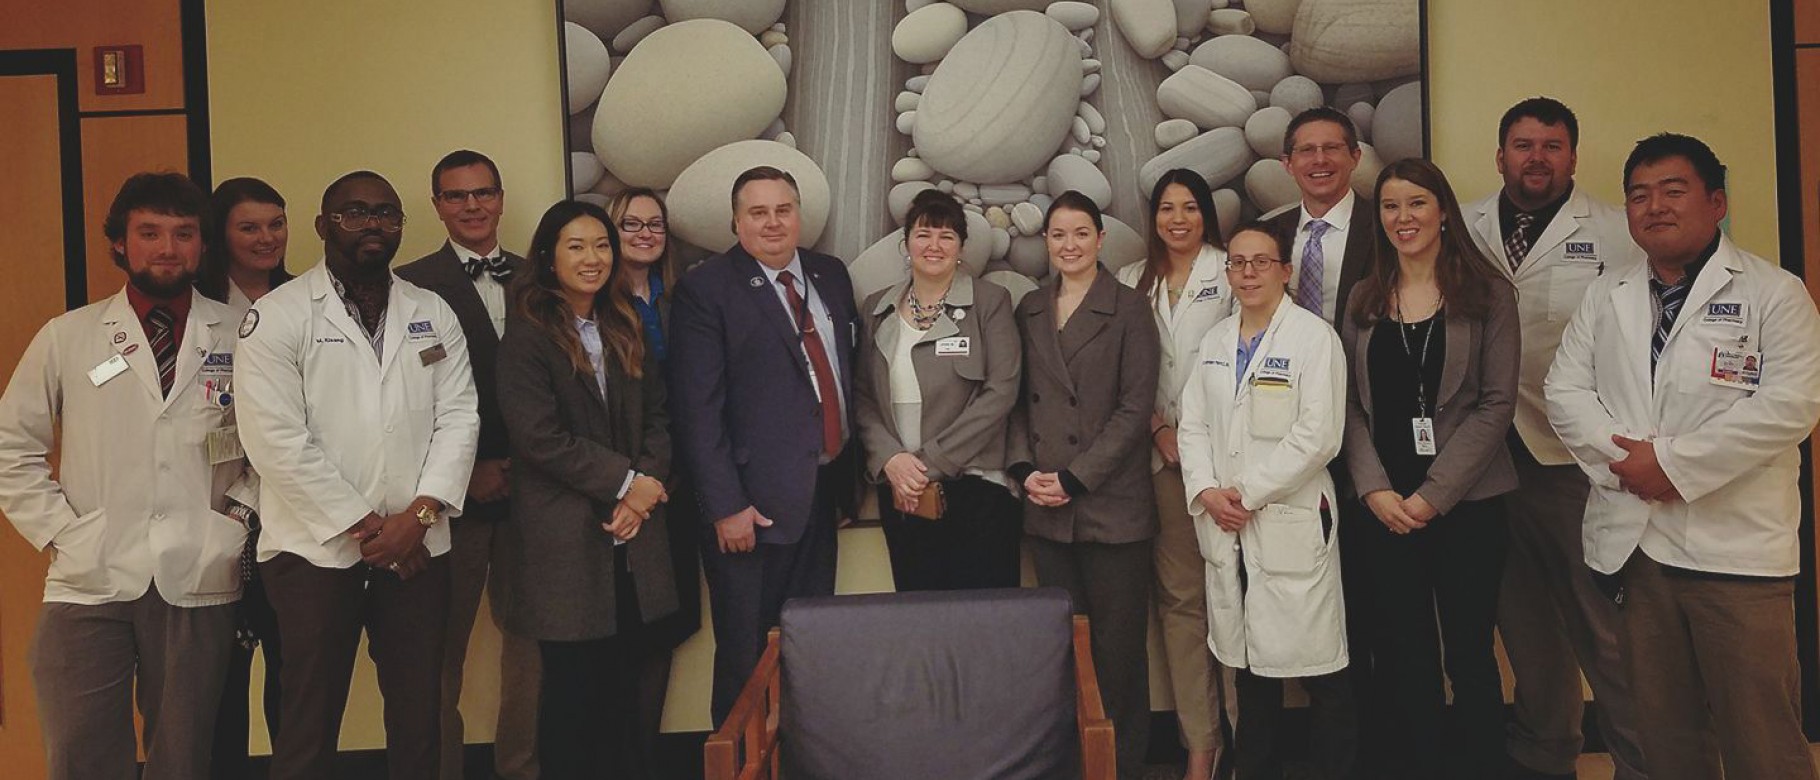 UNE pharmacy students and faculty in Augusta